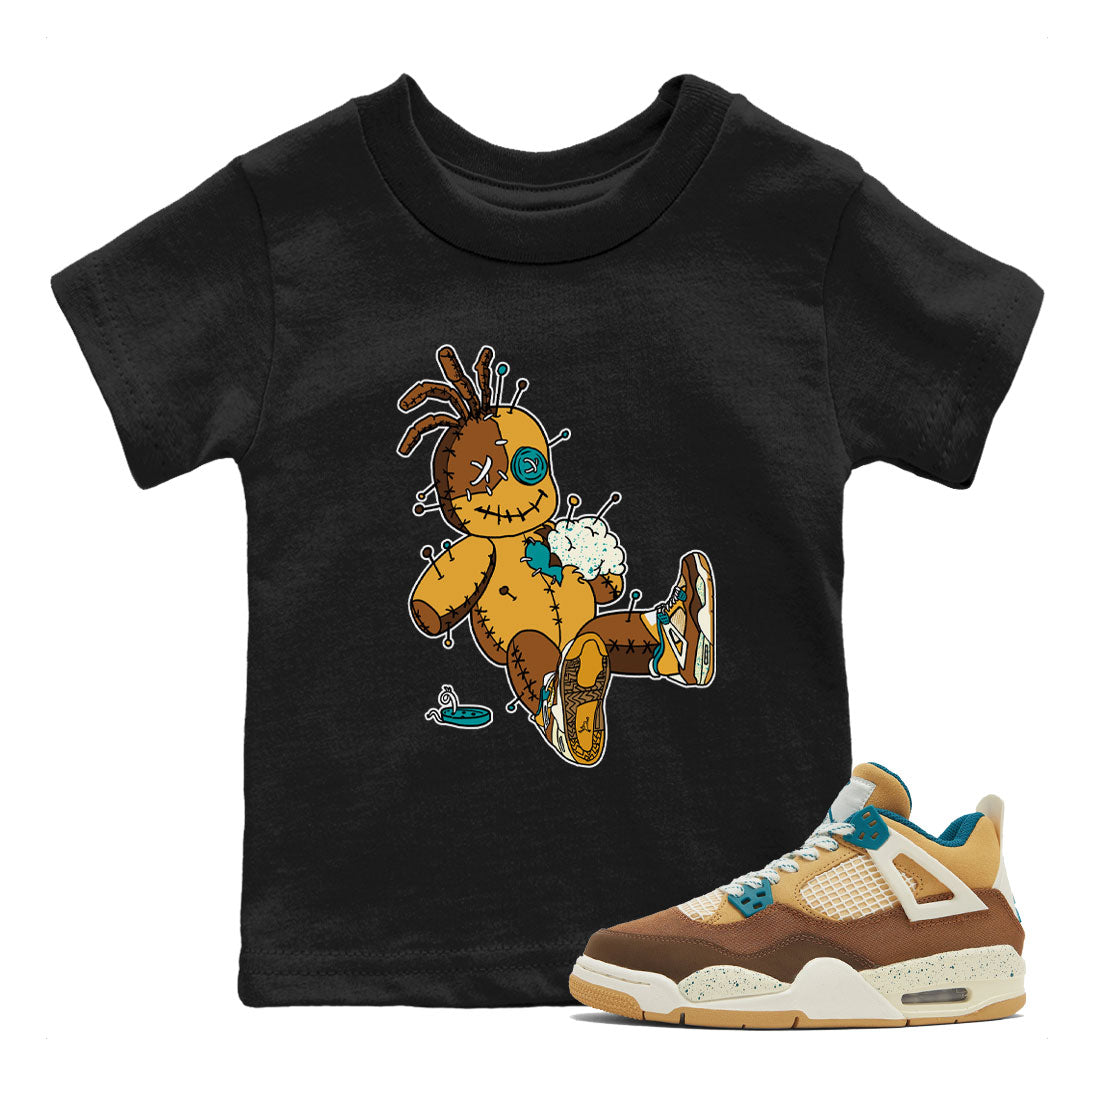 4s Cacao Wow shirt to match jordans Voodoo Doll sneaker tees Air Jordan 4 Cacao Wow SNRT Sneaker Release Tees Baby Toddler Black 1 T-Shirt